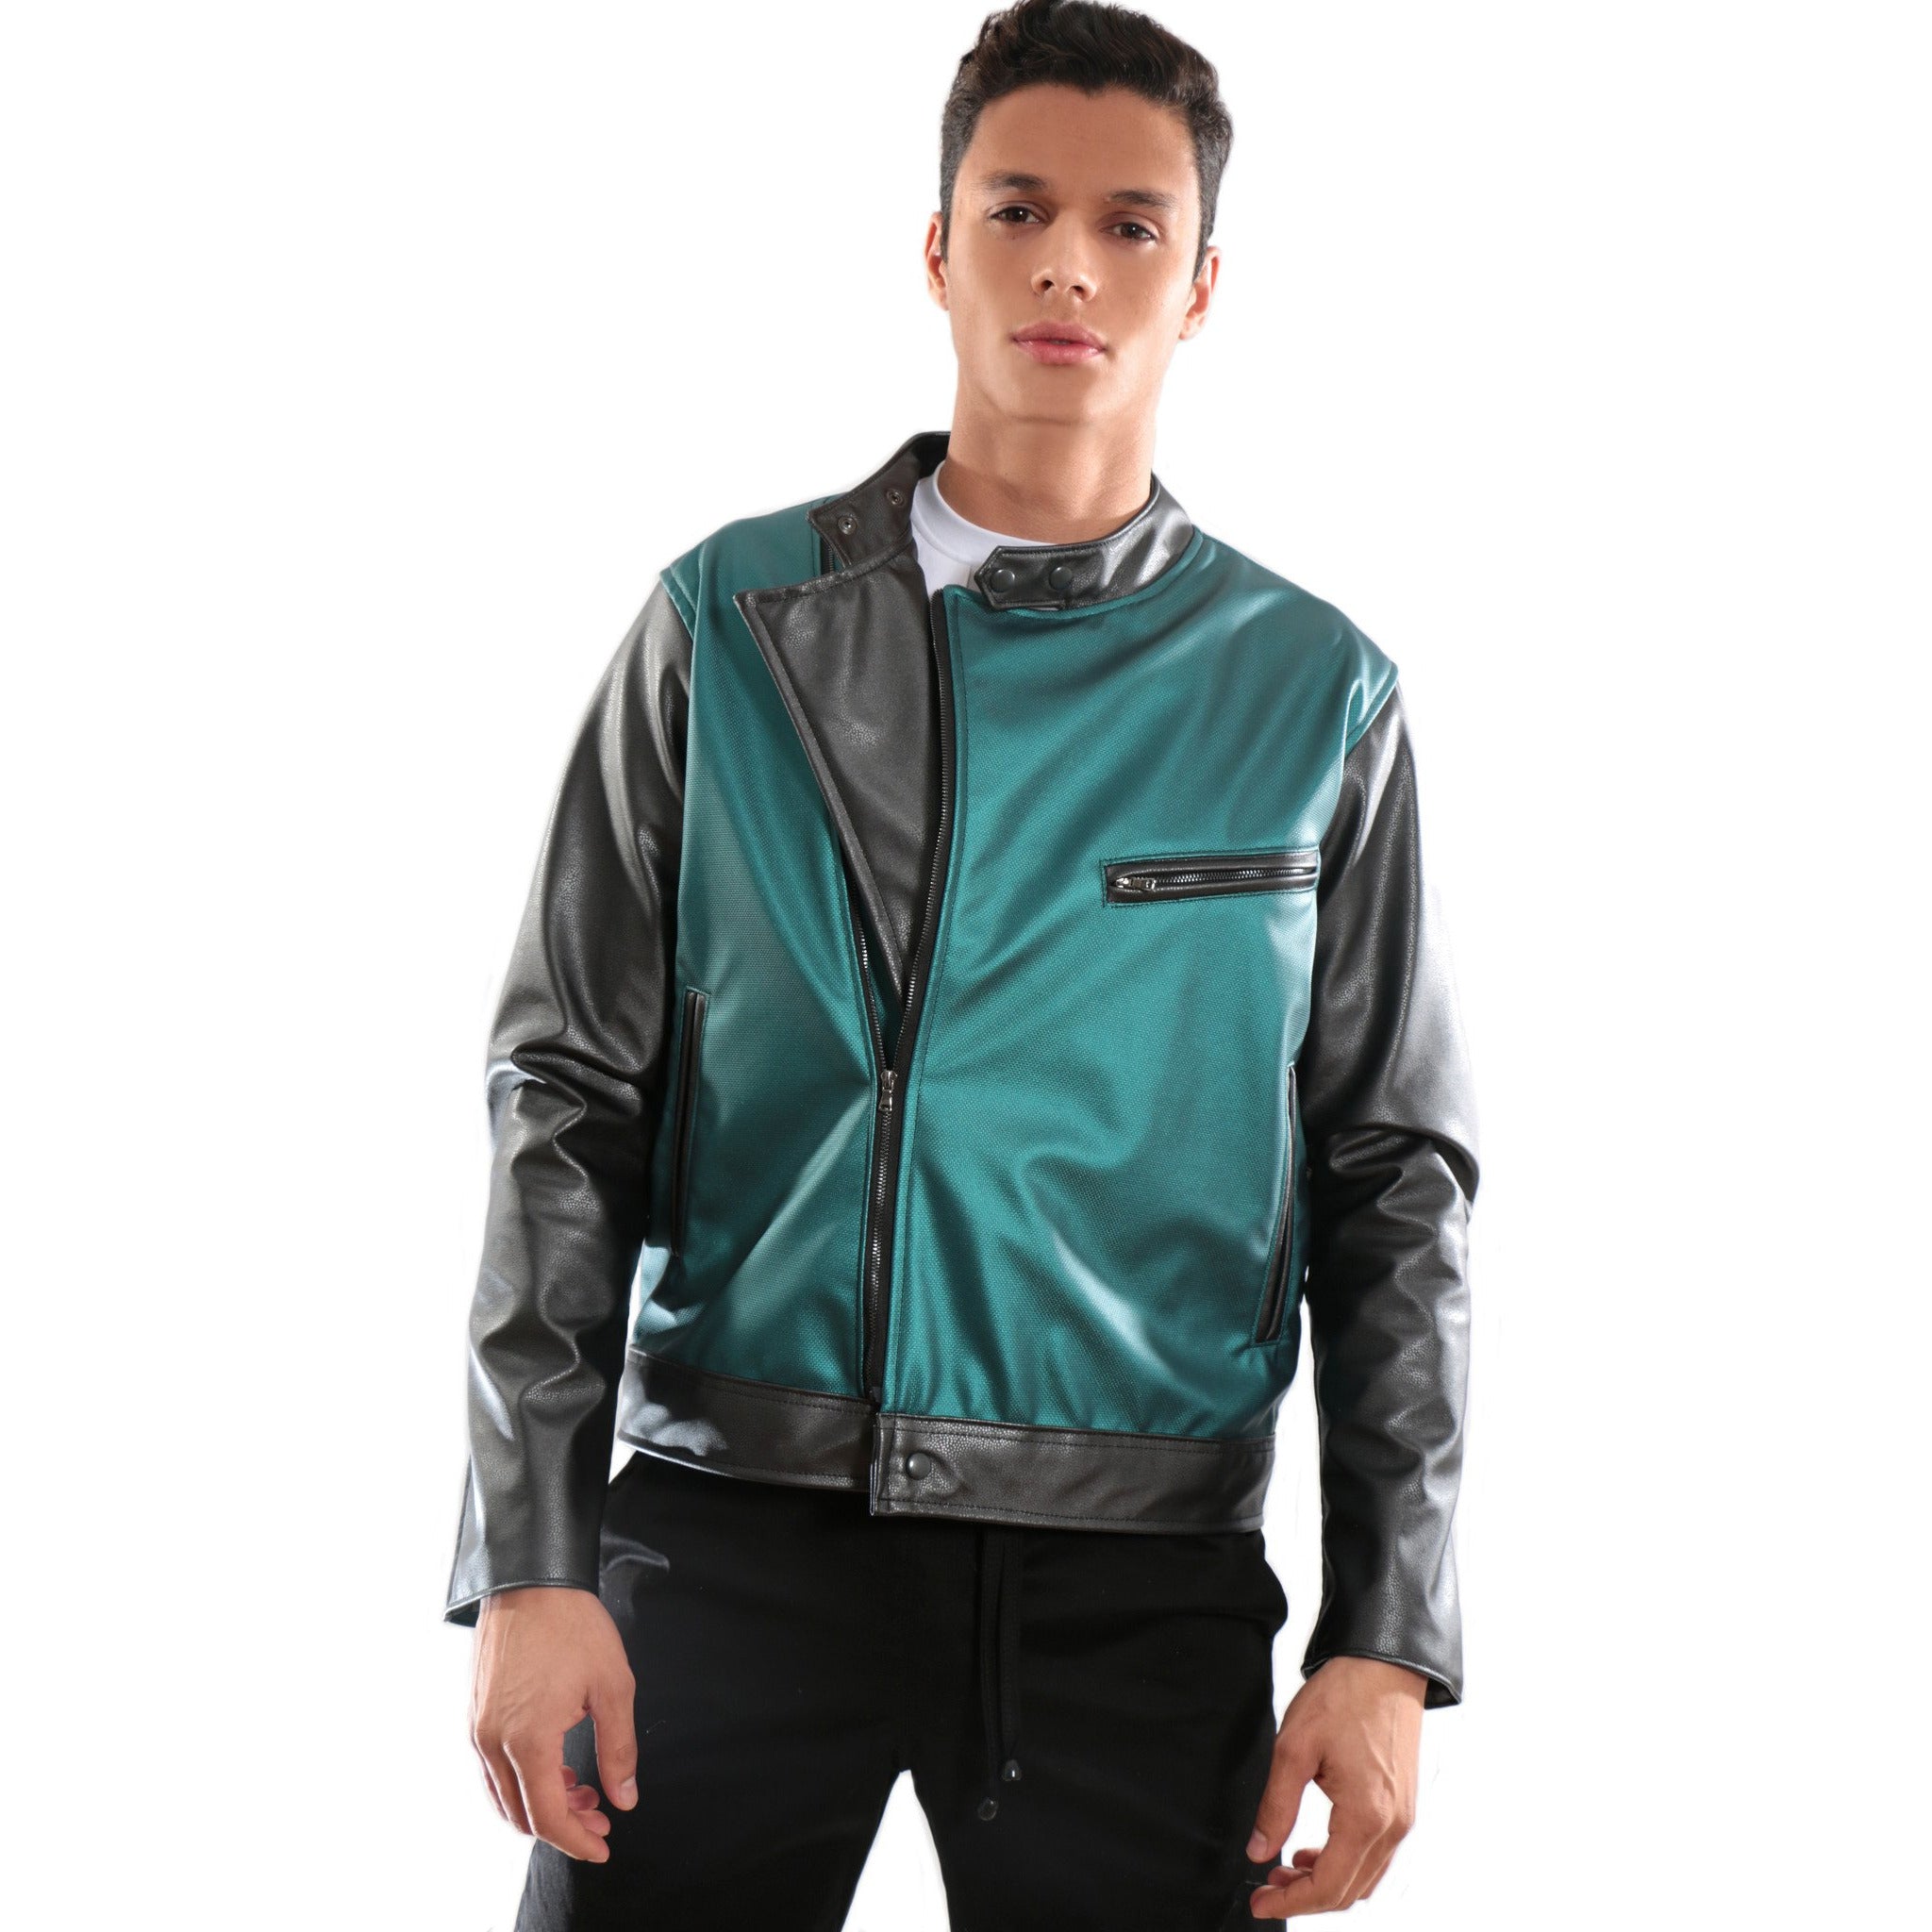 Green and black Synthetic leather Jacket